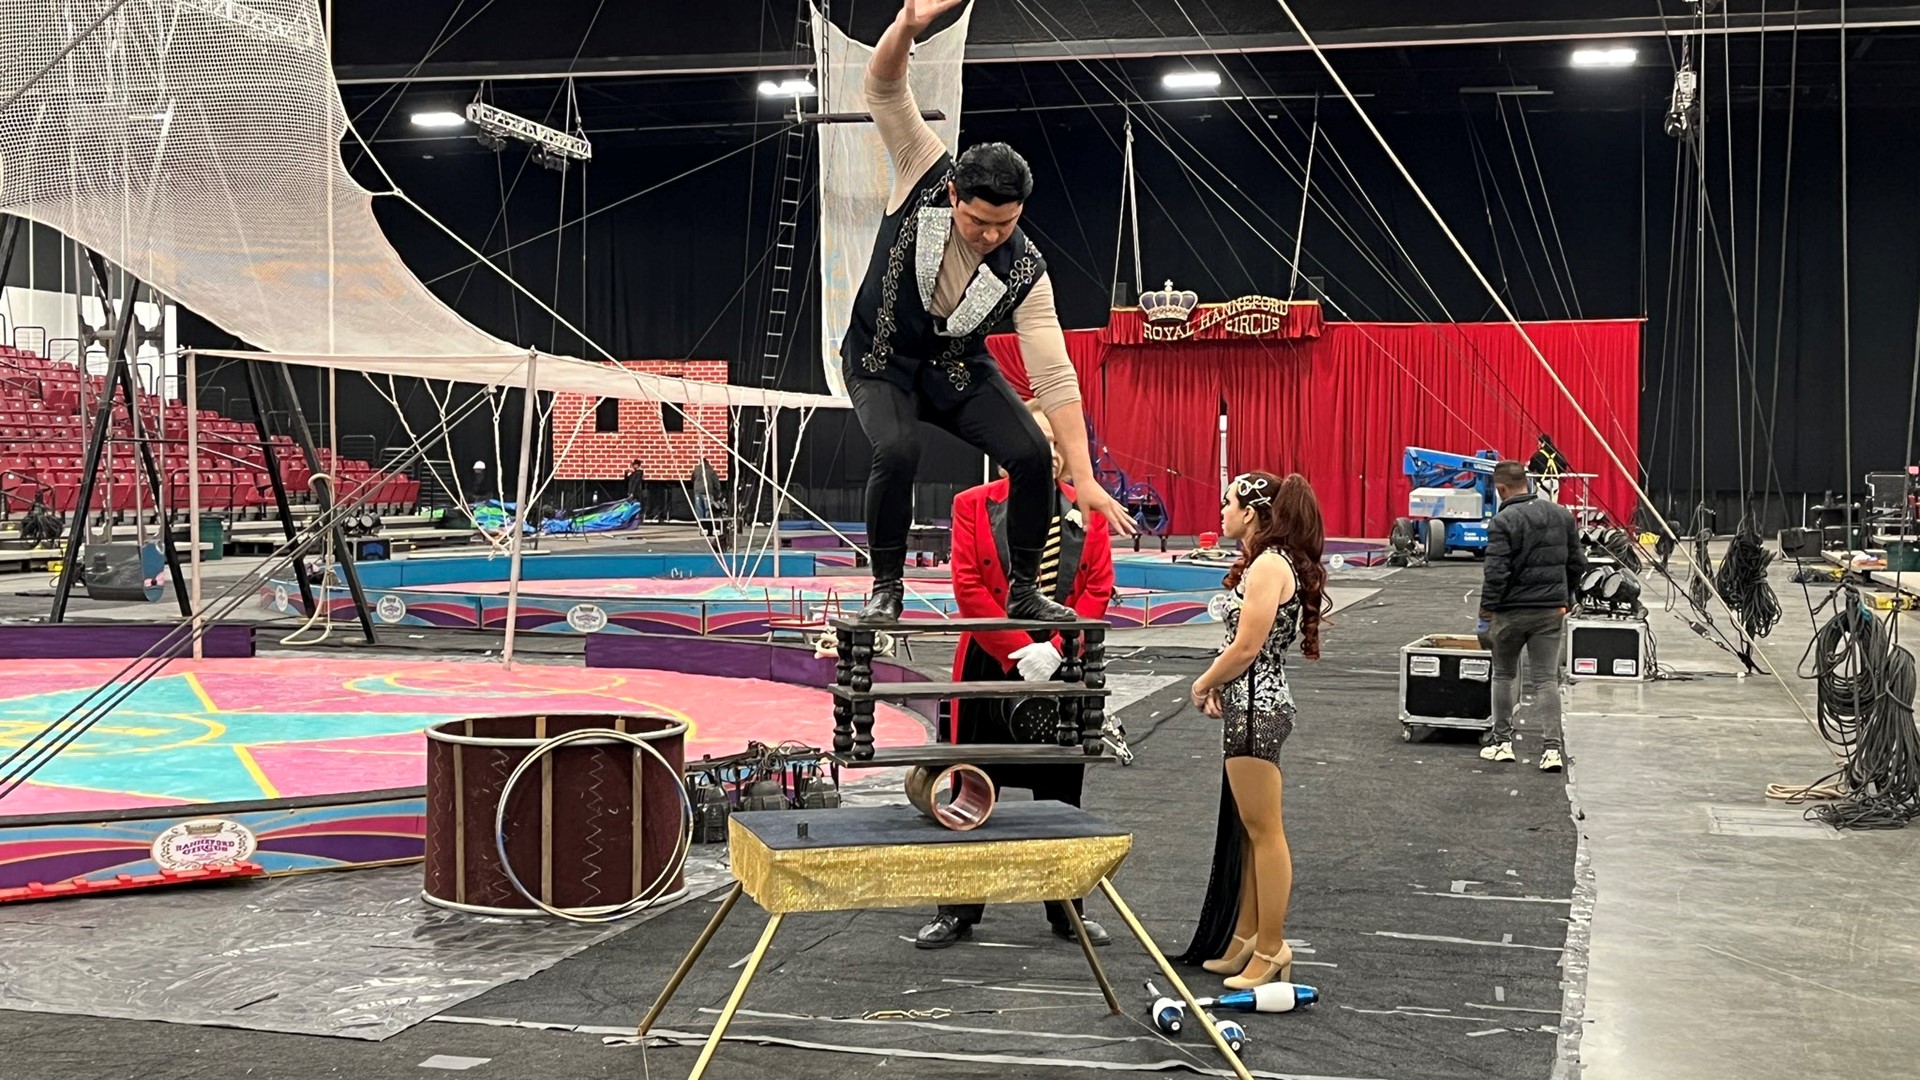 The circus is the primary fundraiser for the Zenobia Shriners branch based in Perrysburg, which serves families and children in need across the region.